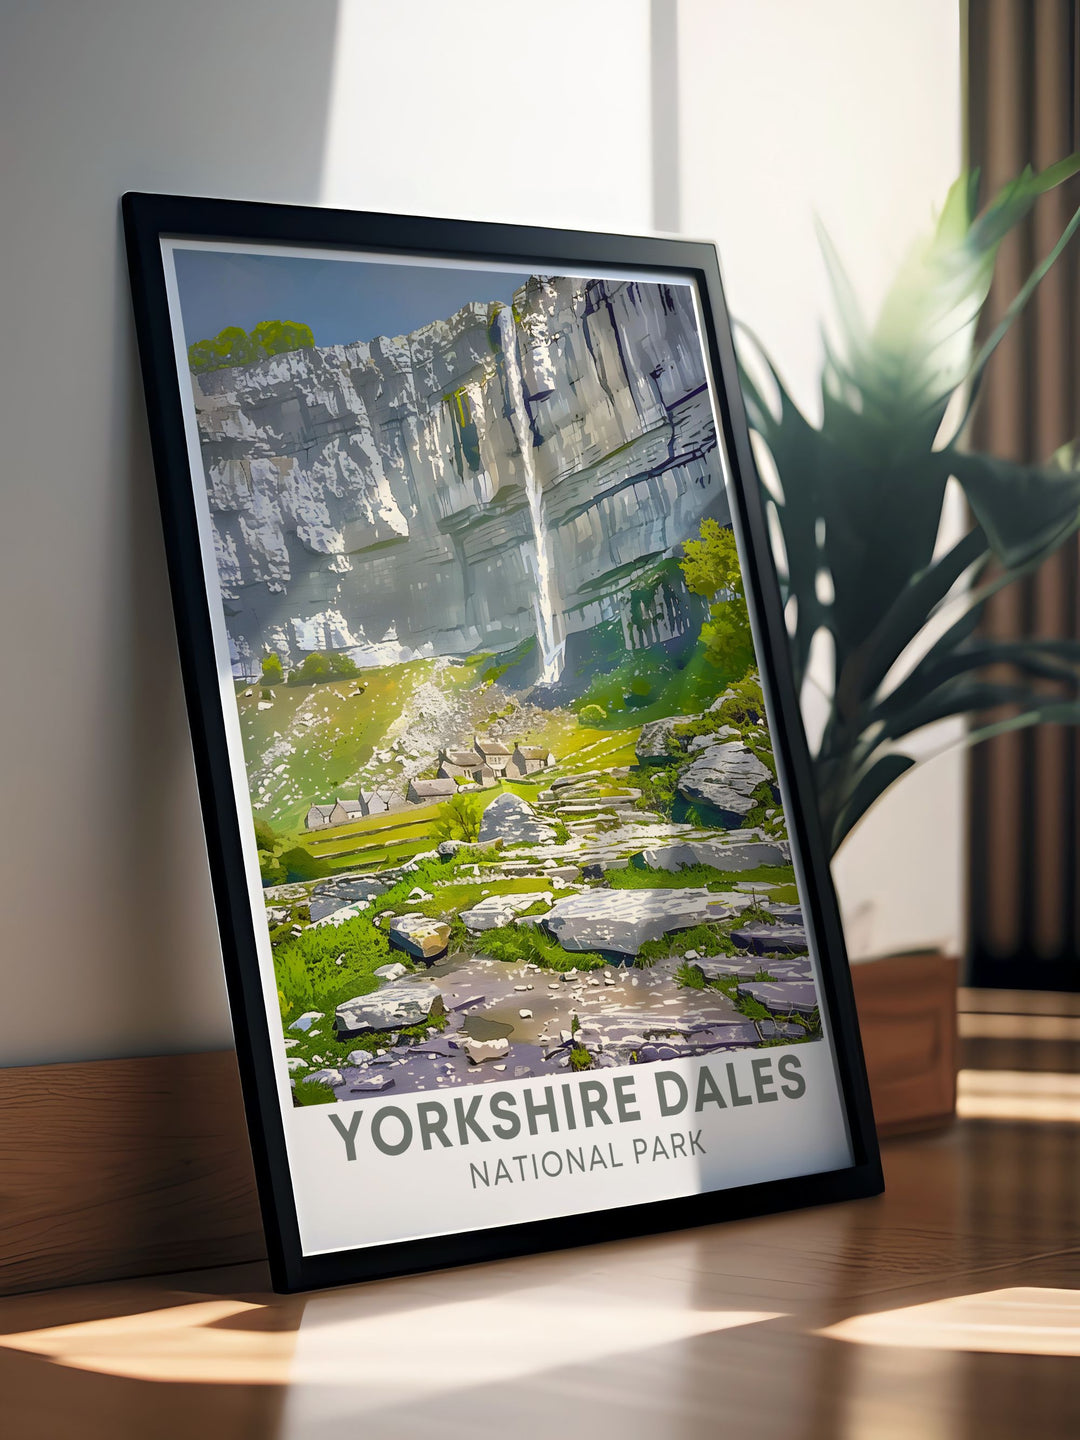 Discover the charm of the Yorkshire Dales with this Malhom Cov posterViaduct featuring stunning views of the iconic viaduct and lush surroundings perfect for any nature lovers home.